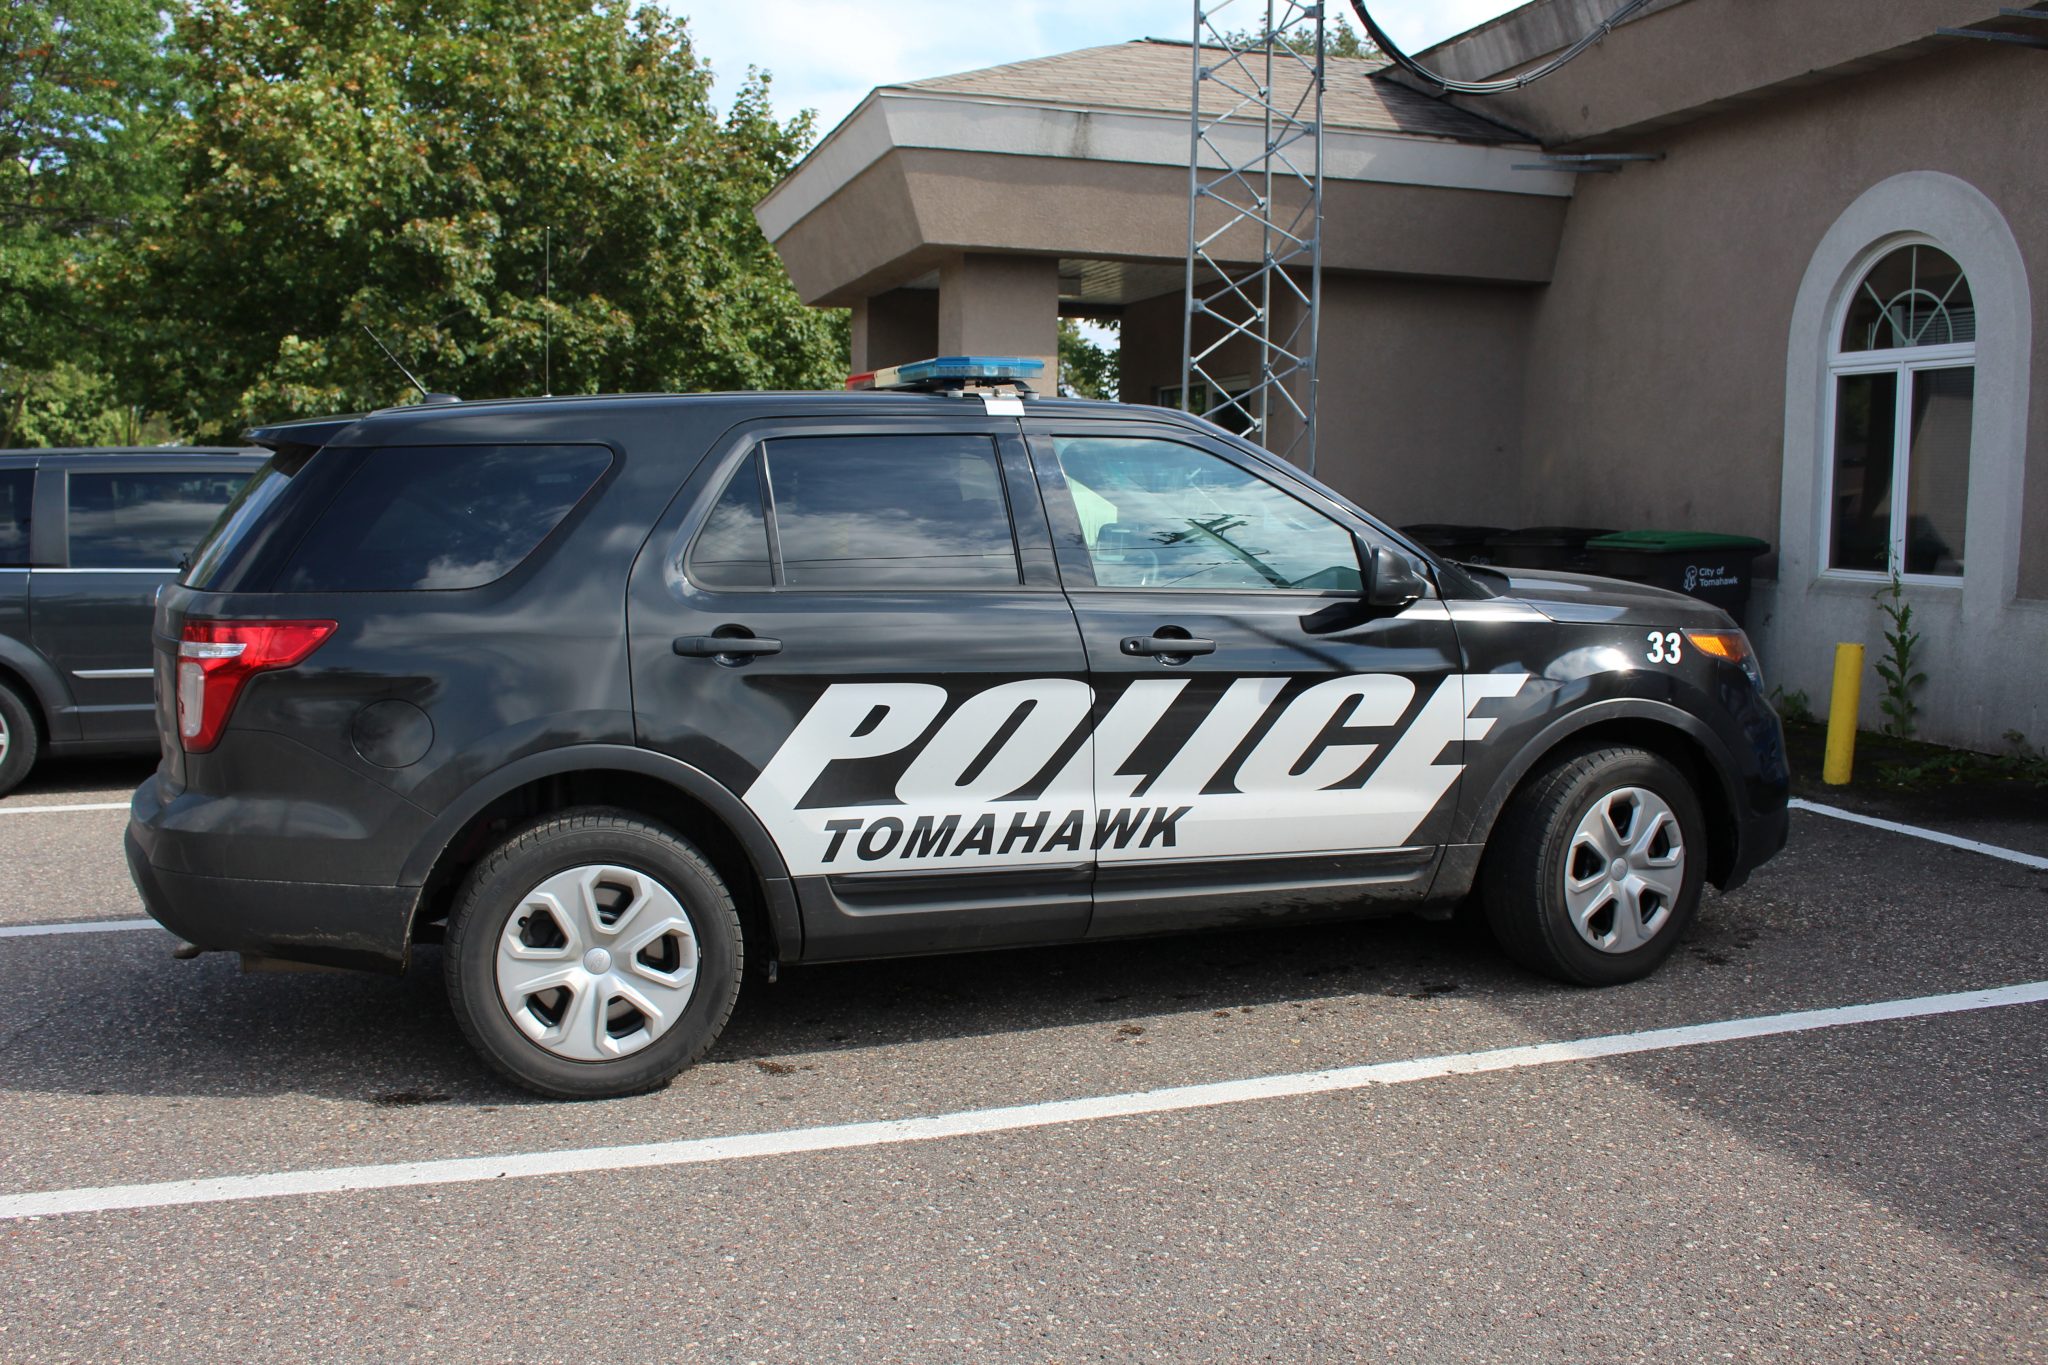 2020 Annual TPD Report: Department again under budget; incidents down more than 25%